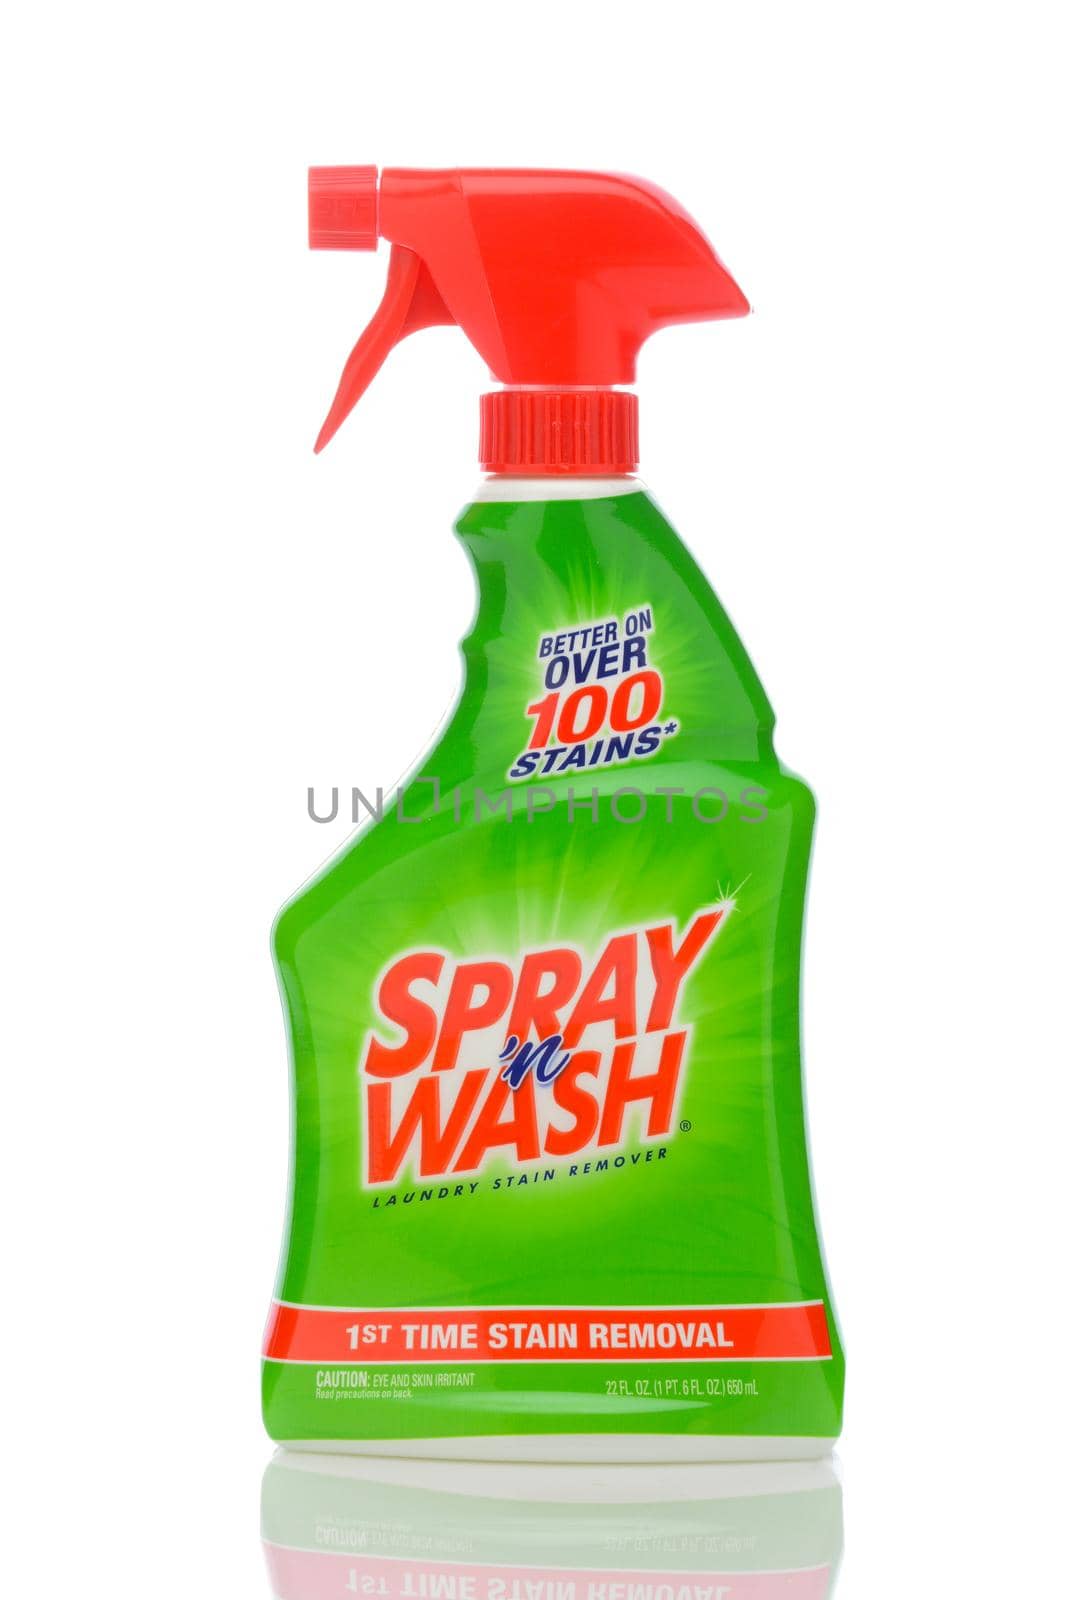 A Bottle of Spray n Wash Laundry Stain Remover.  by sCukrov